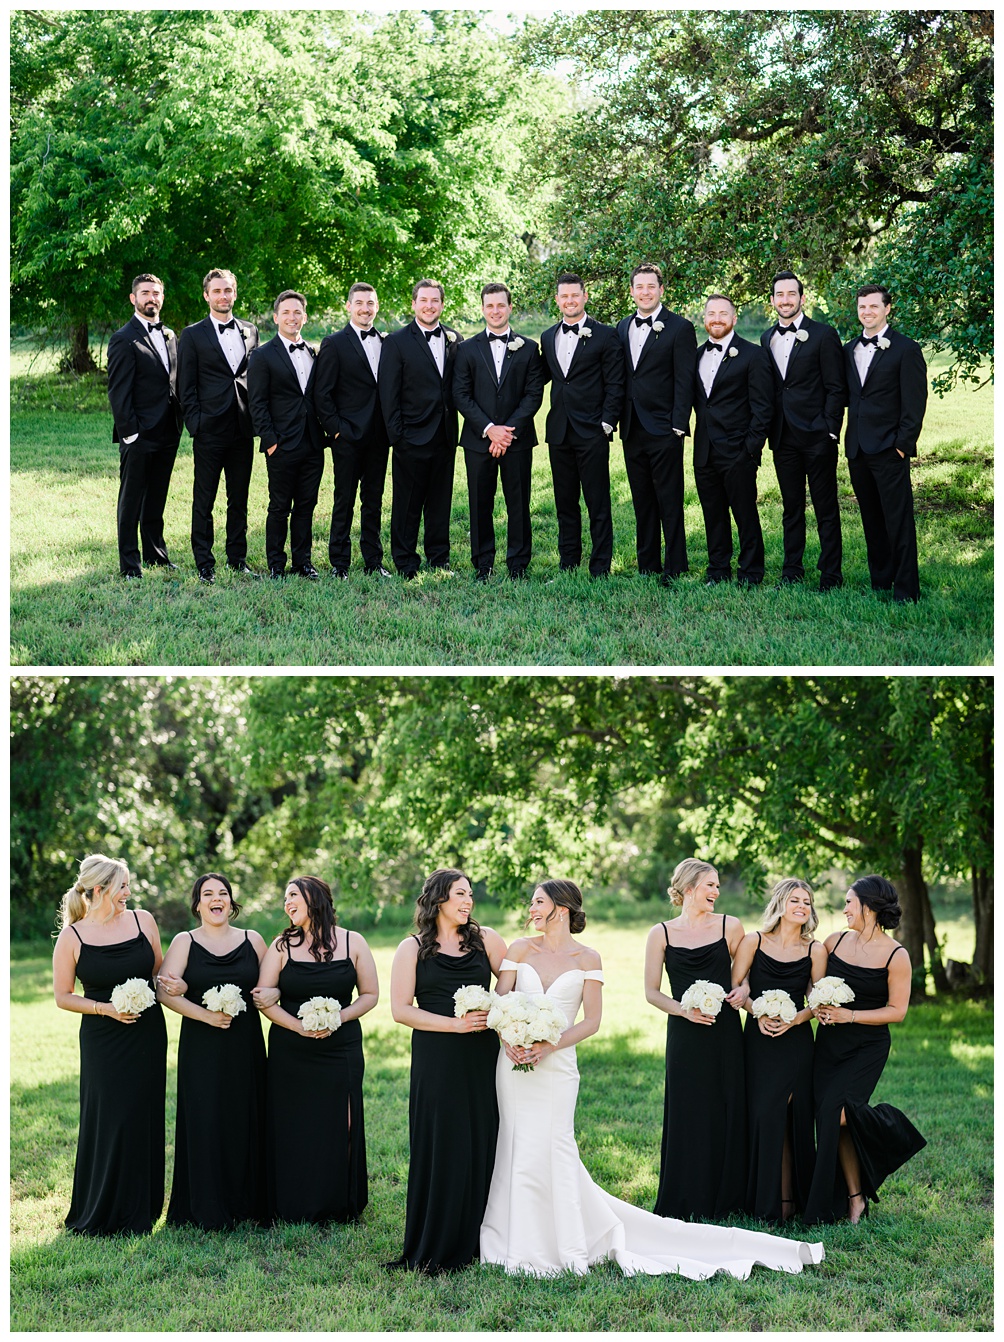 Wedding Party in all black for a black tie wedding in Austin Texas